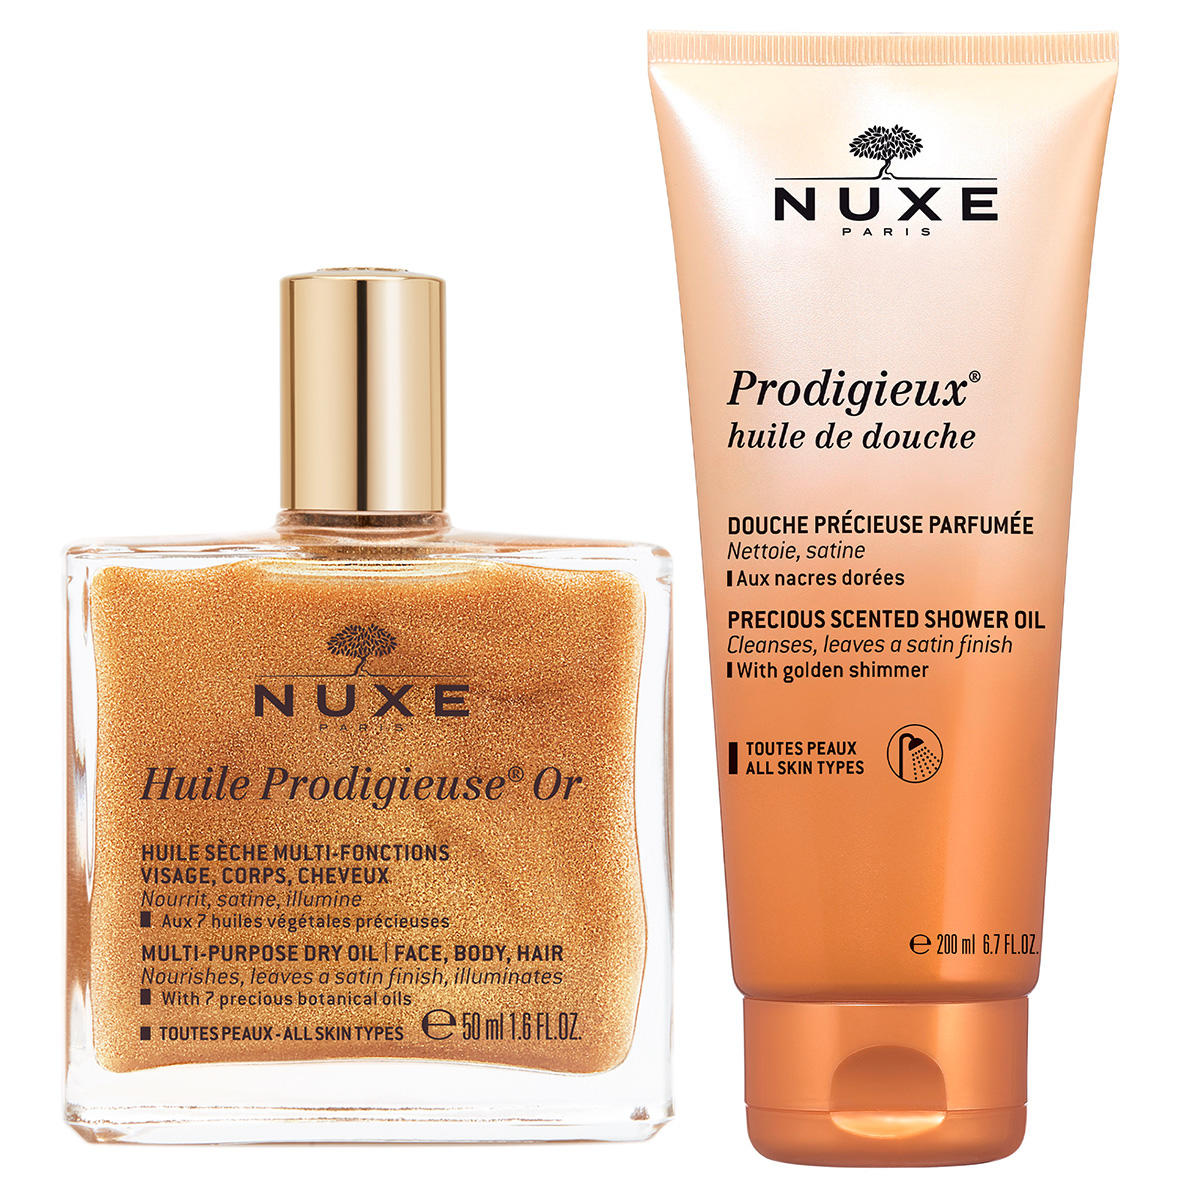 NUXE Prodigieux Must Have Set